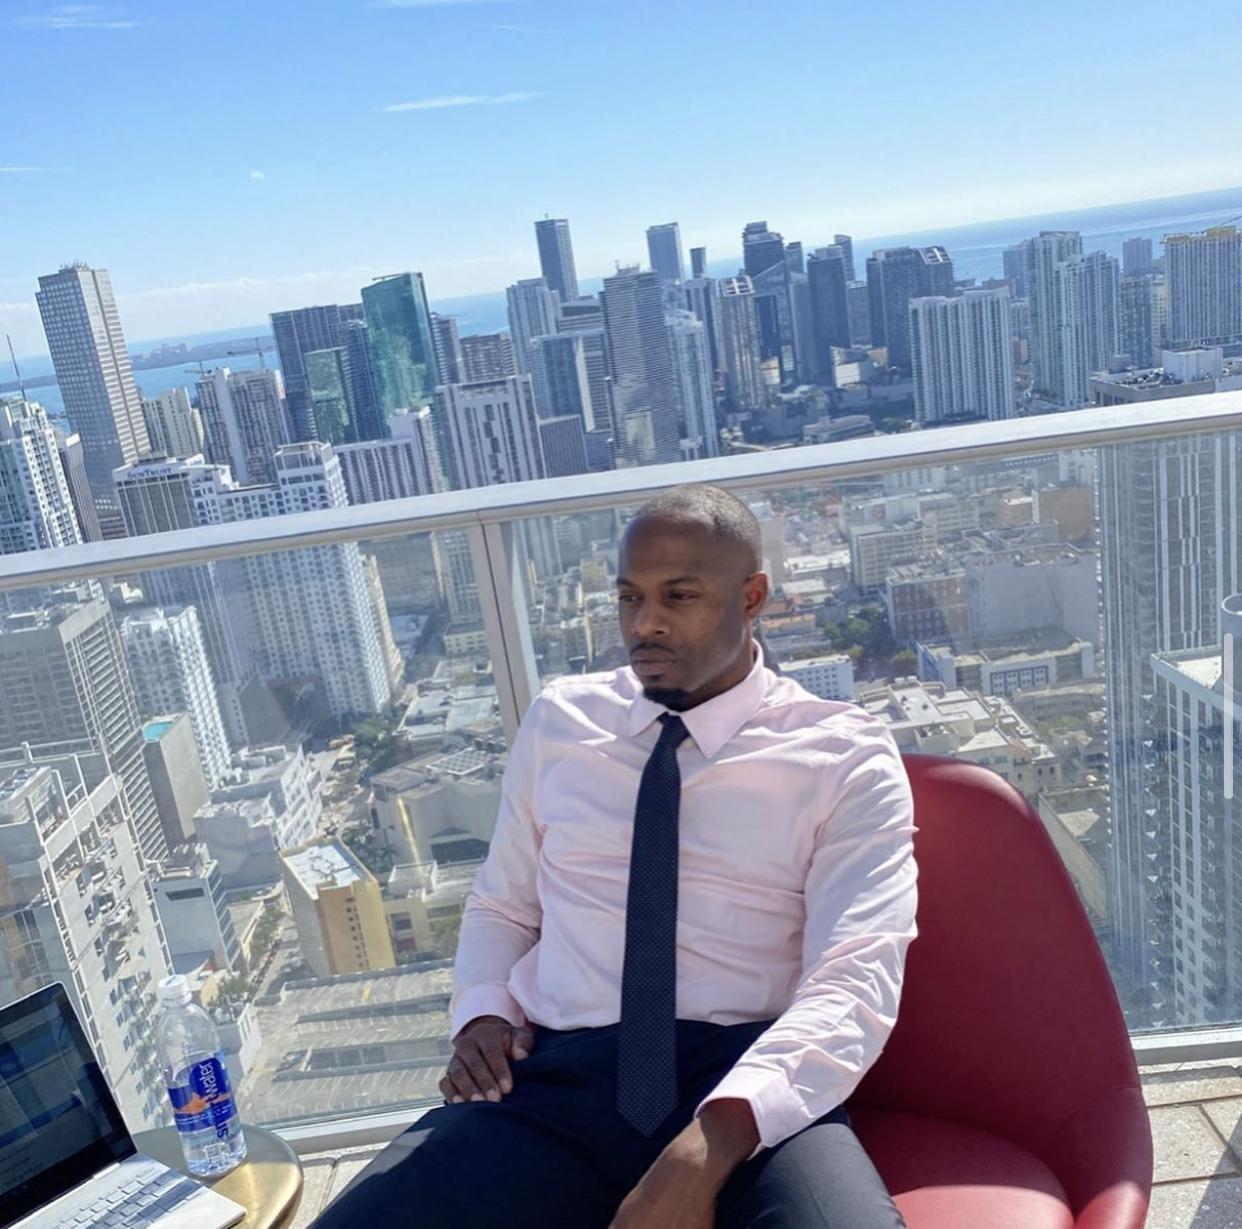 Ex-Athlete Turned Business Owner, William Lefear, invests in a High-End Vacation Rental Company, offering Luxury Short term Rentals around the U.S.